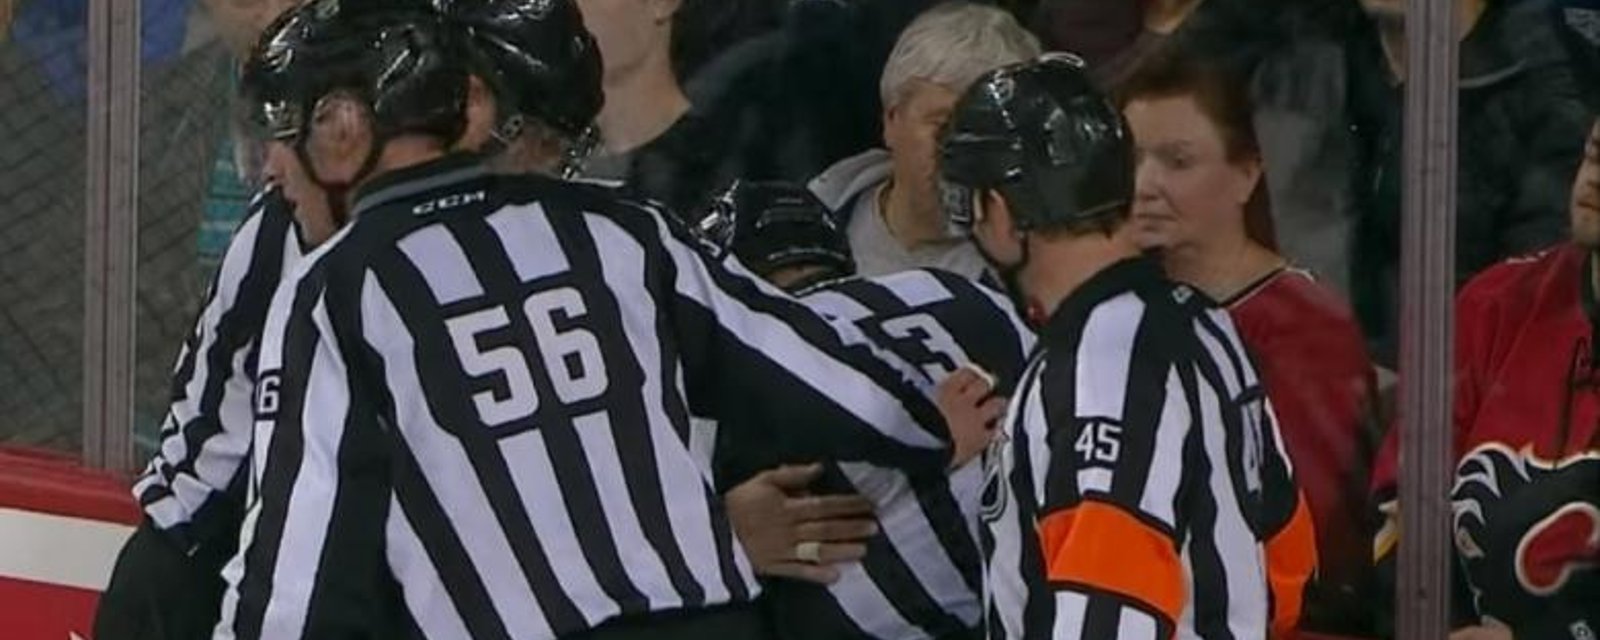 The Calgary Flames take out another NHL official on Wednesday night.